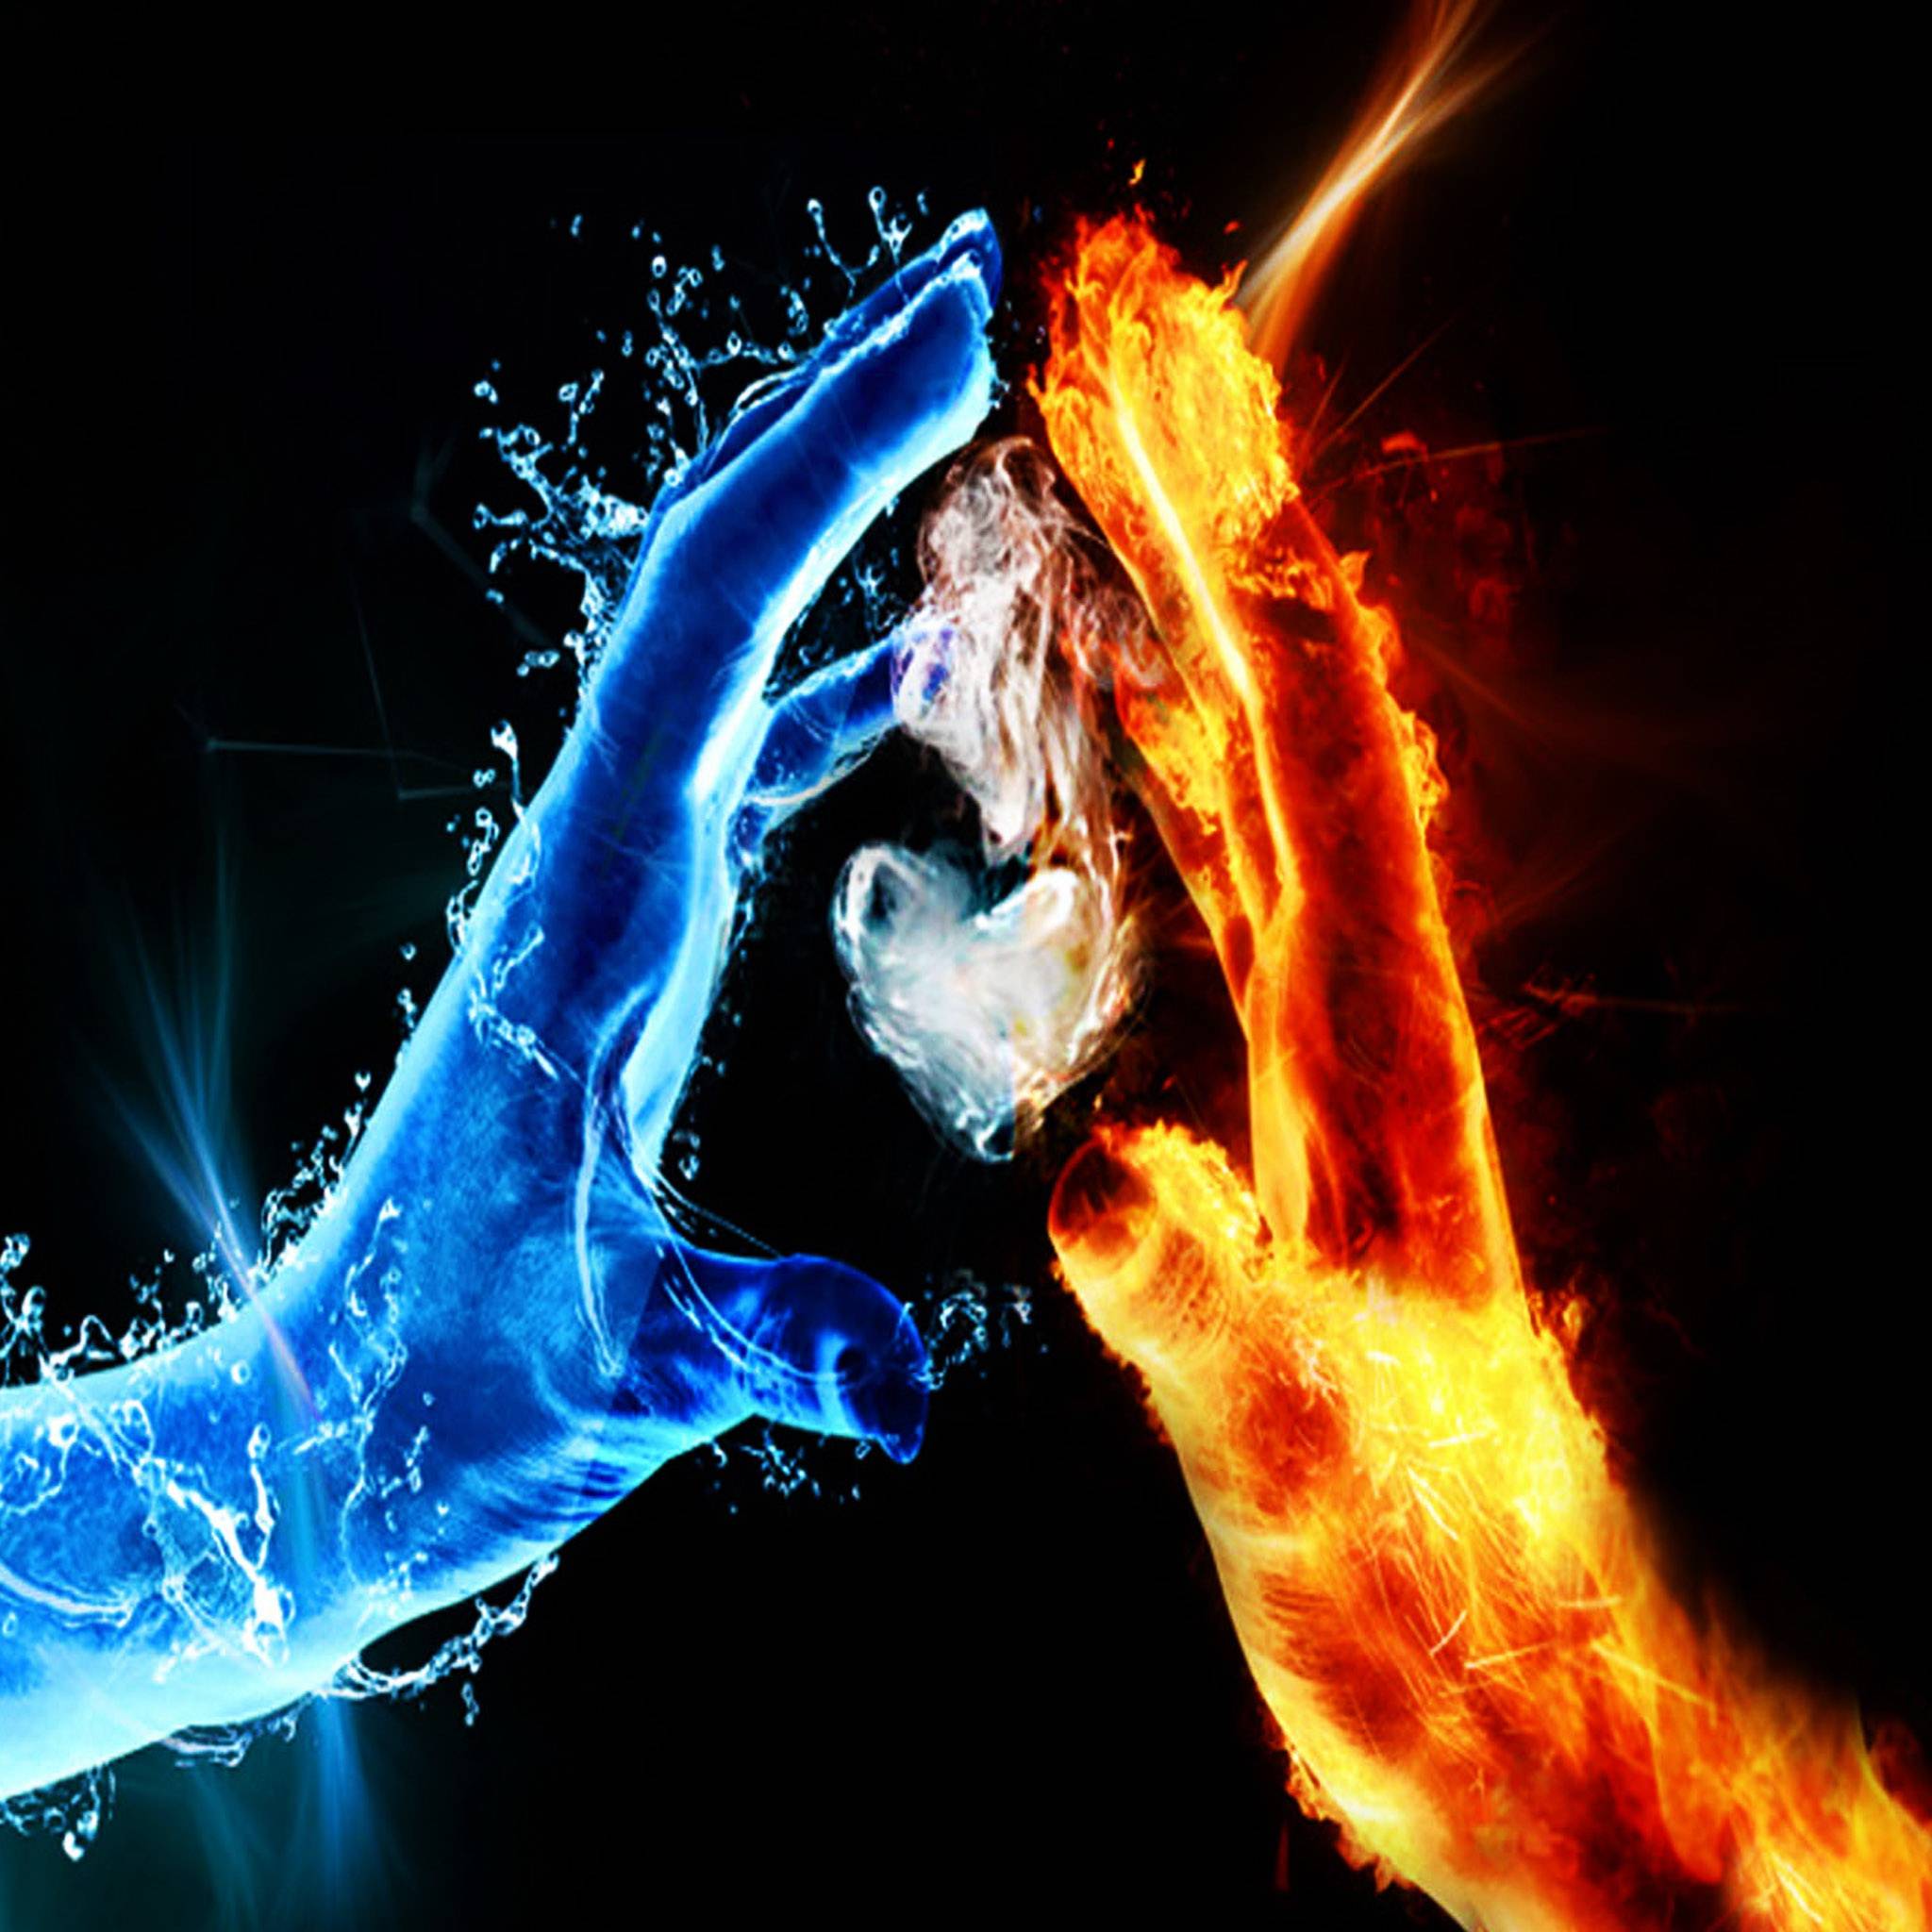 Fire and Ice wallpaper by Dariuss  Download on ZEDGE  9dbd